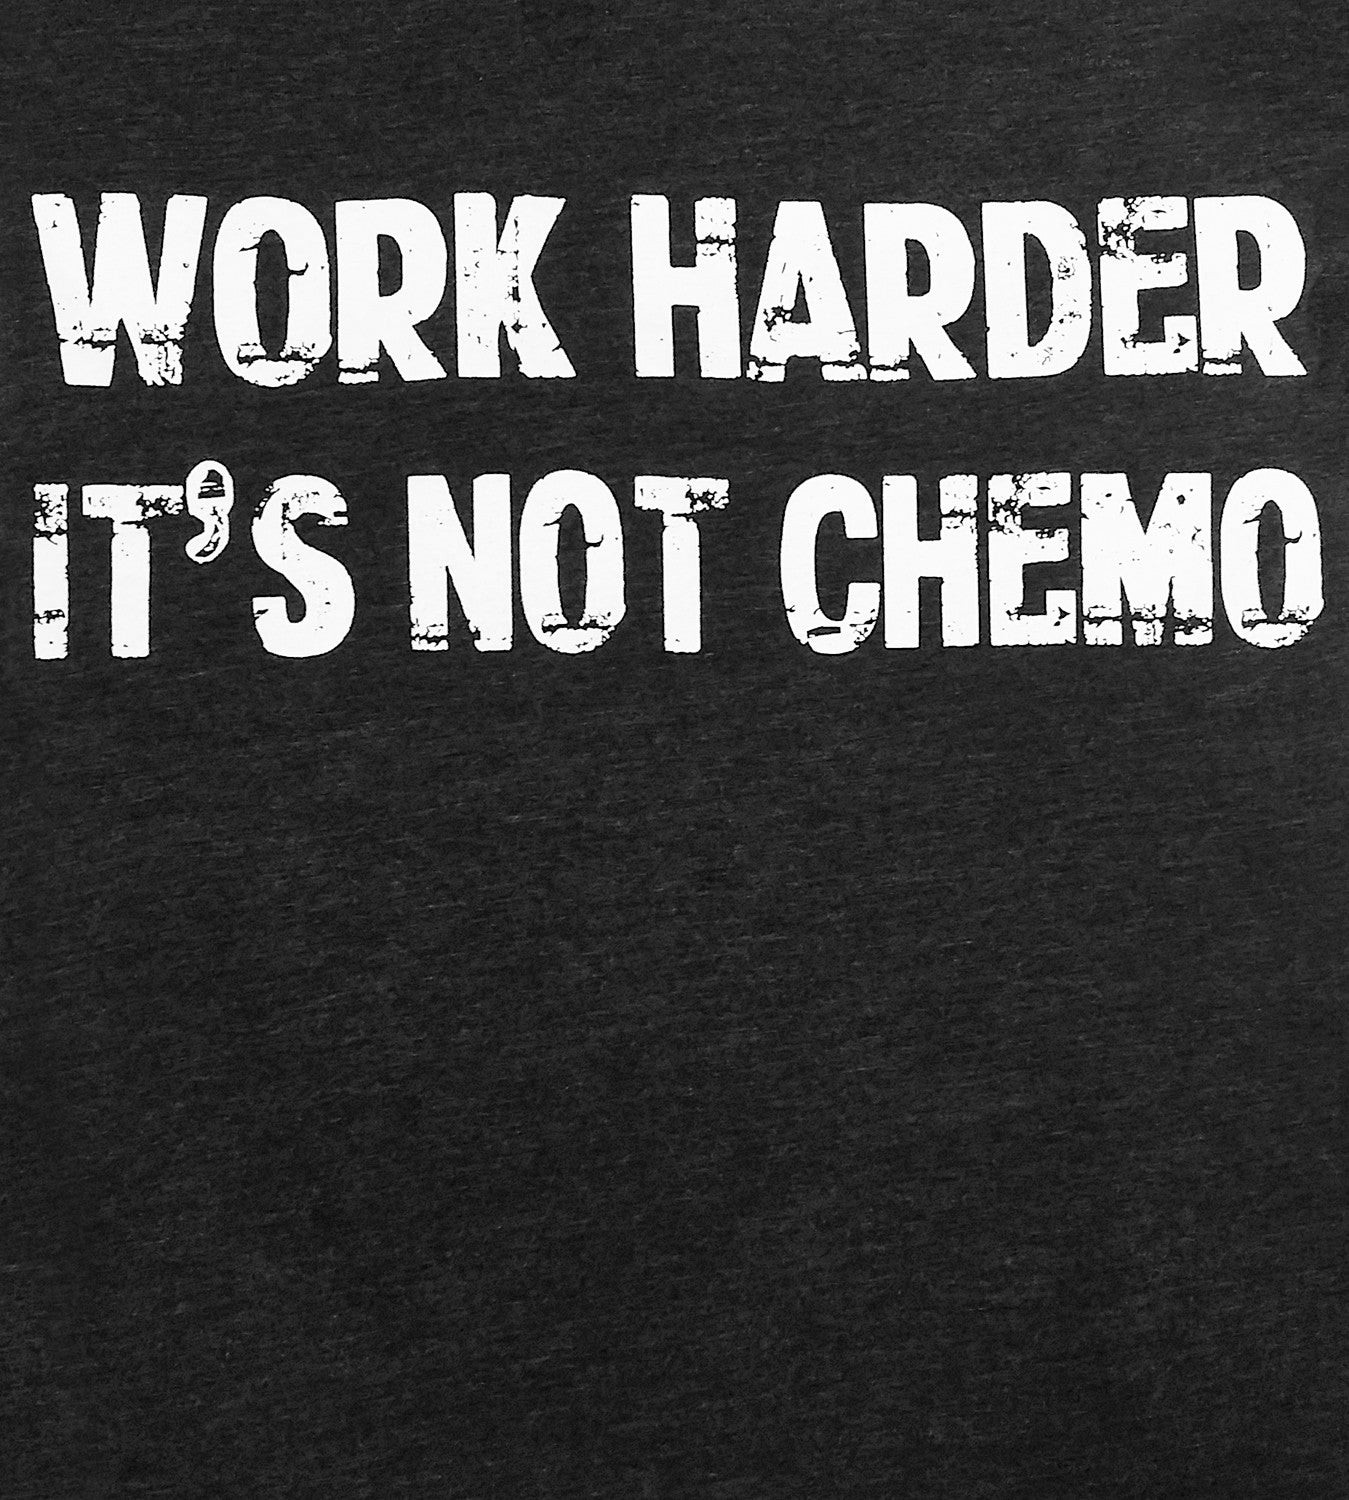 close up of Black shirt with white worker harder its not chemo logo